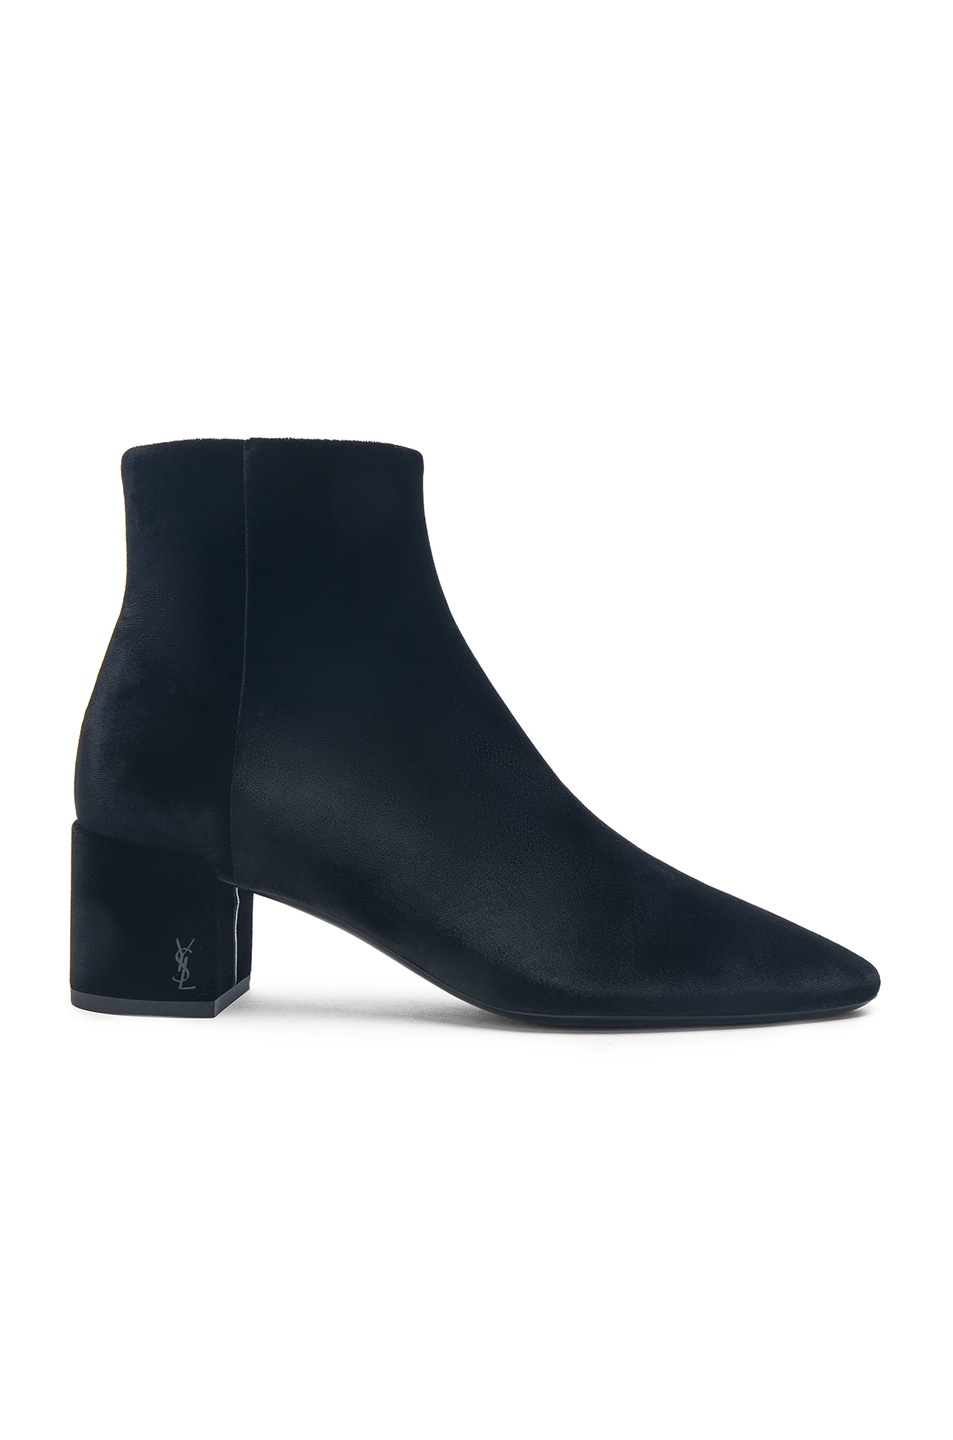 Image 1 of Saint Laurent Velvet Loulou Pin Ankle Boots in Black